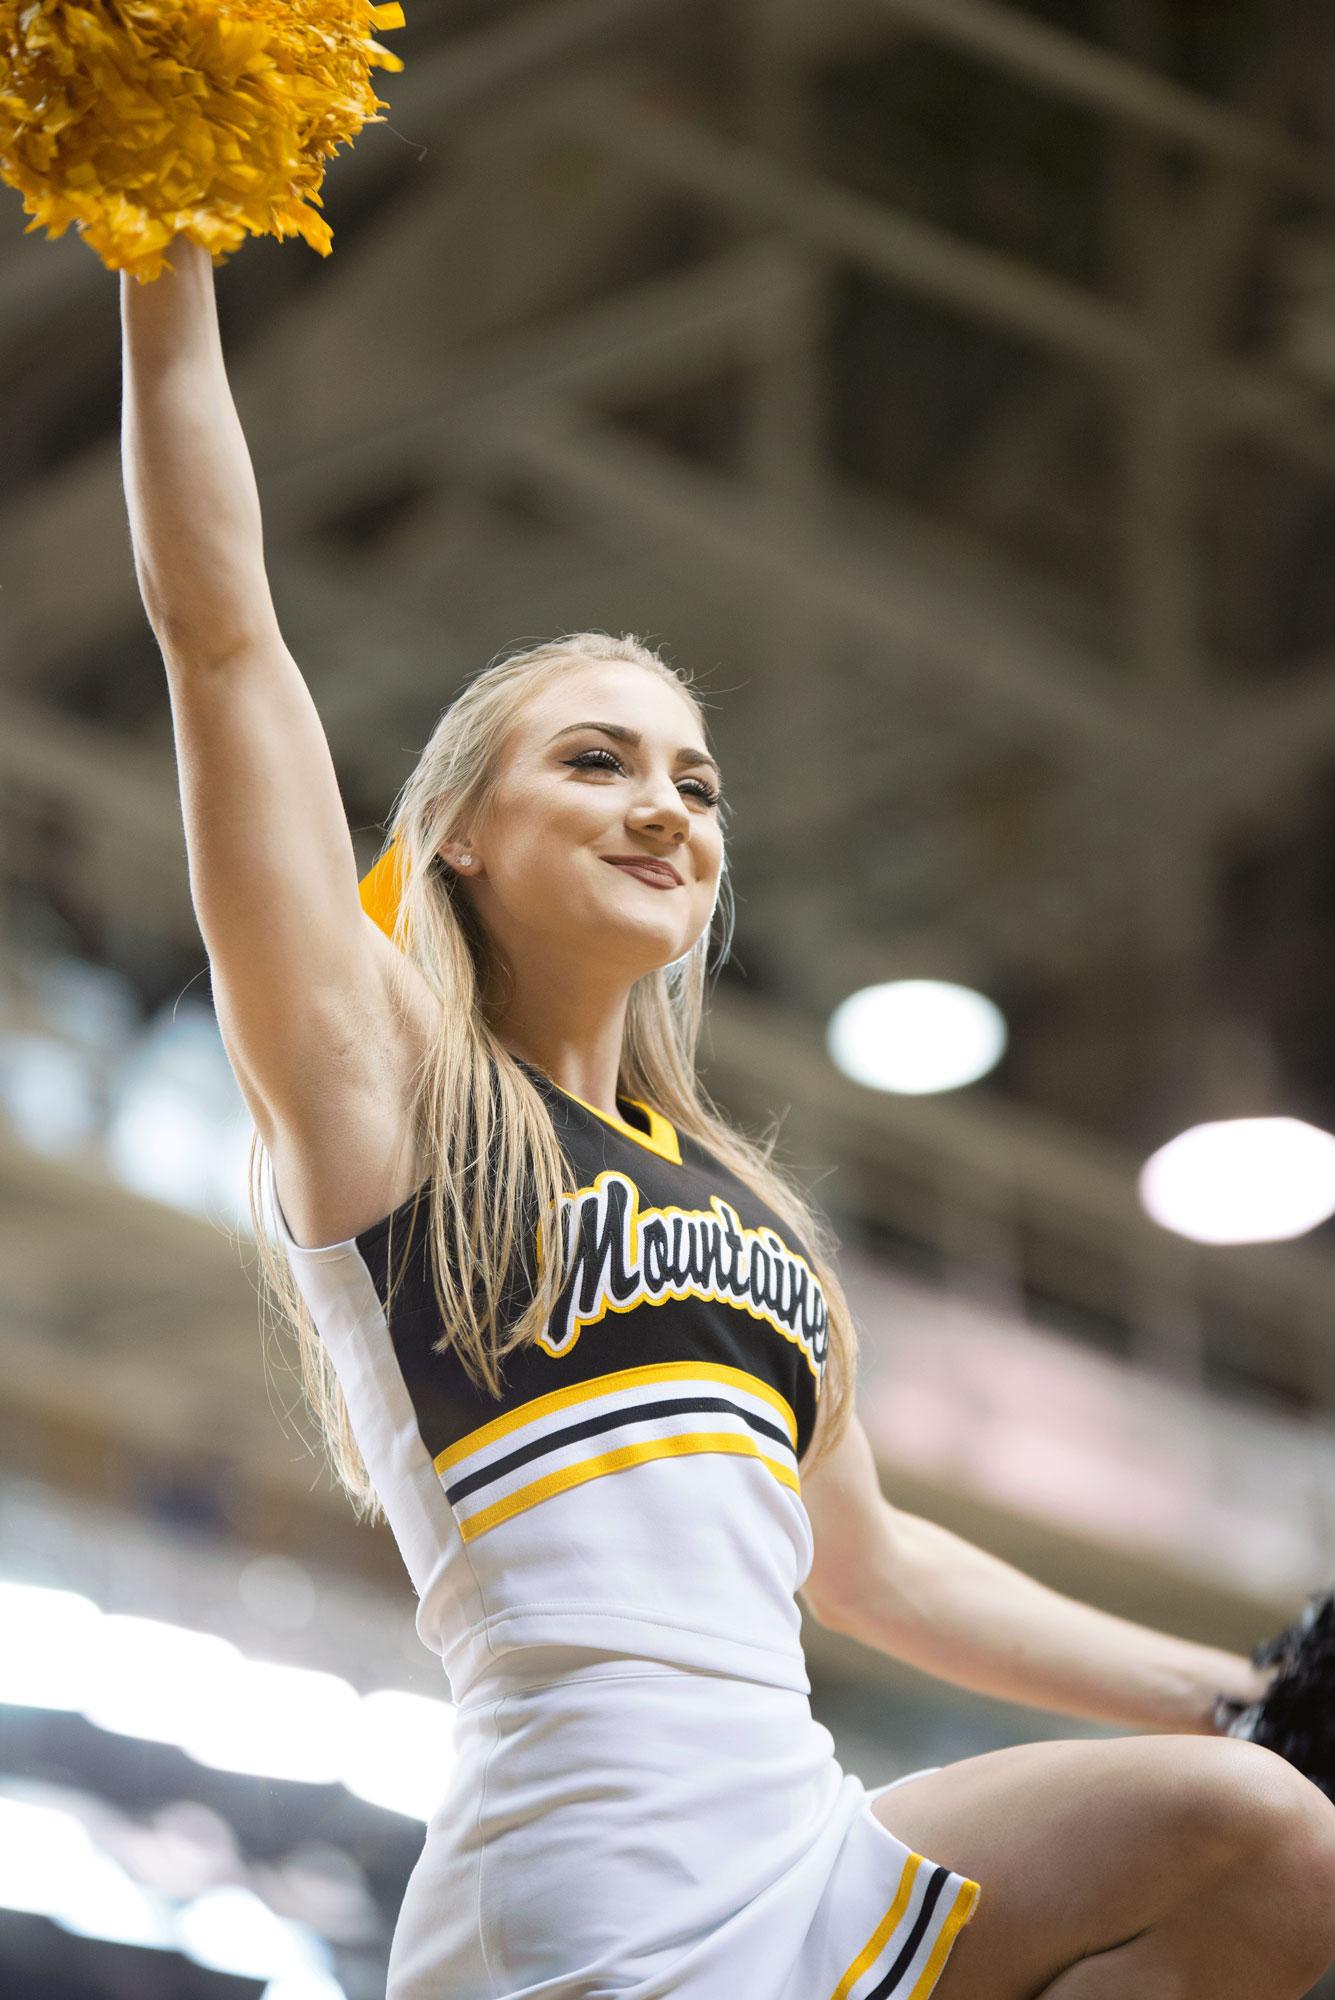 App cheerleading prepares for Canam Nationals The Appalachian